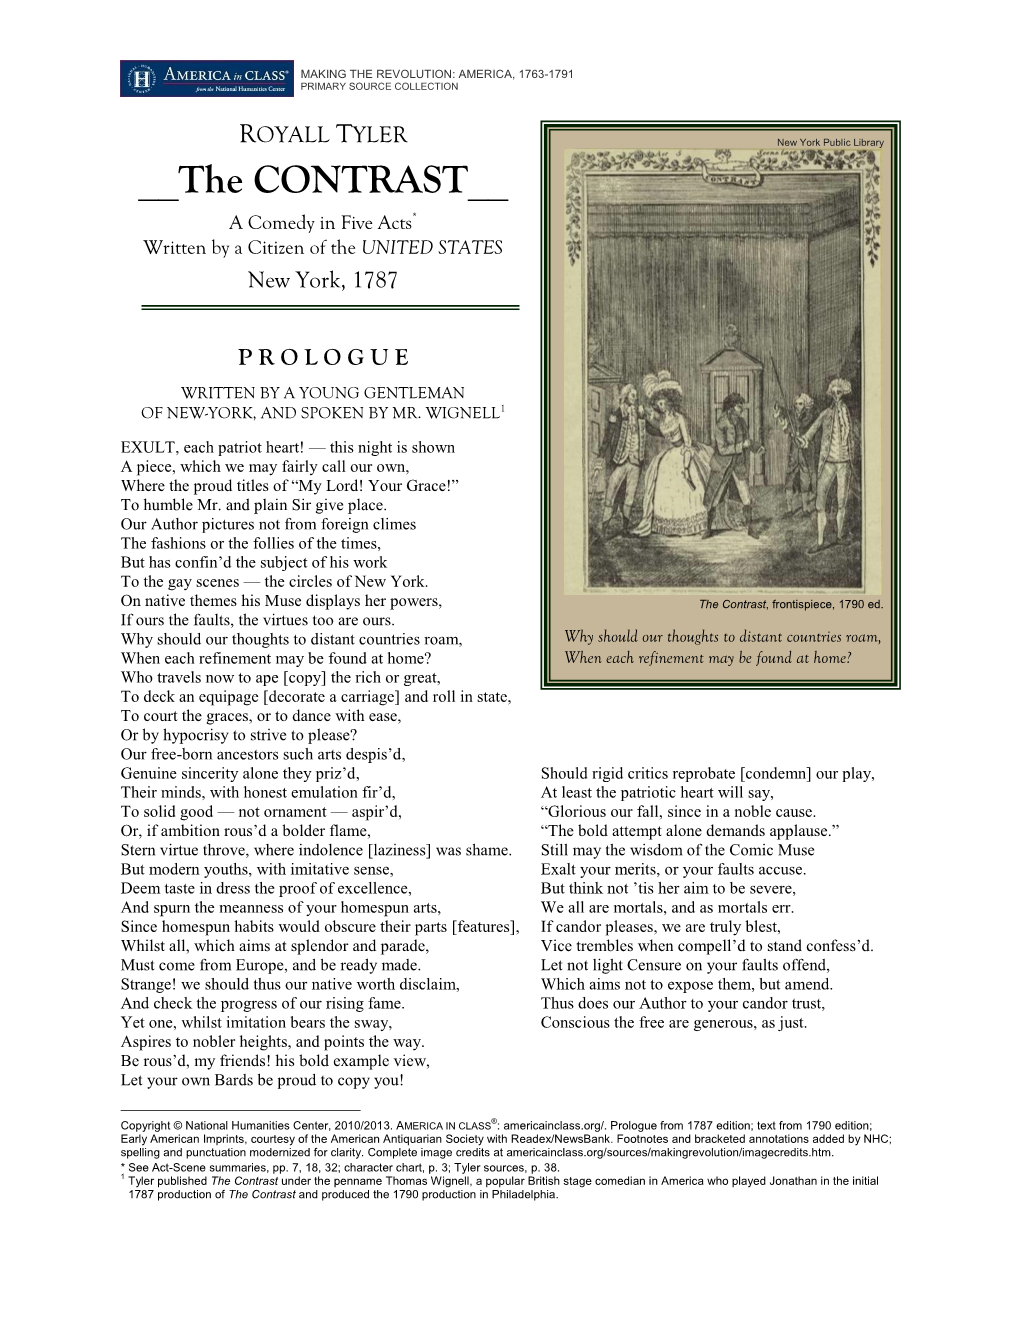 Royall Tyler, the Contrast, Comedy of Manners, 1787